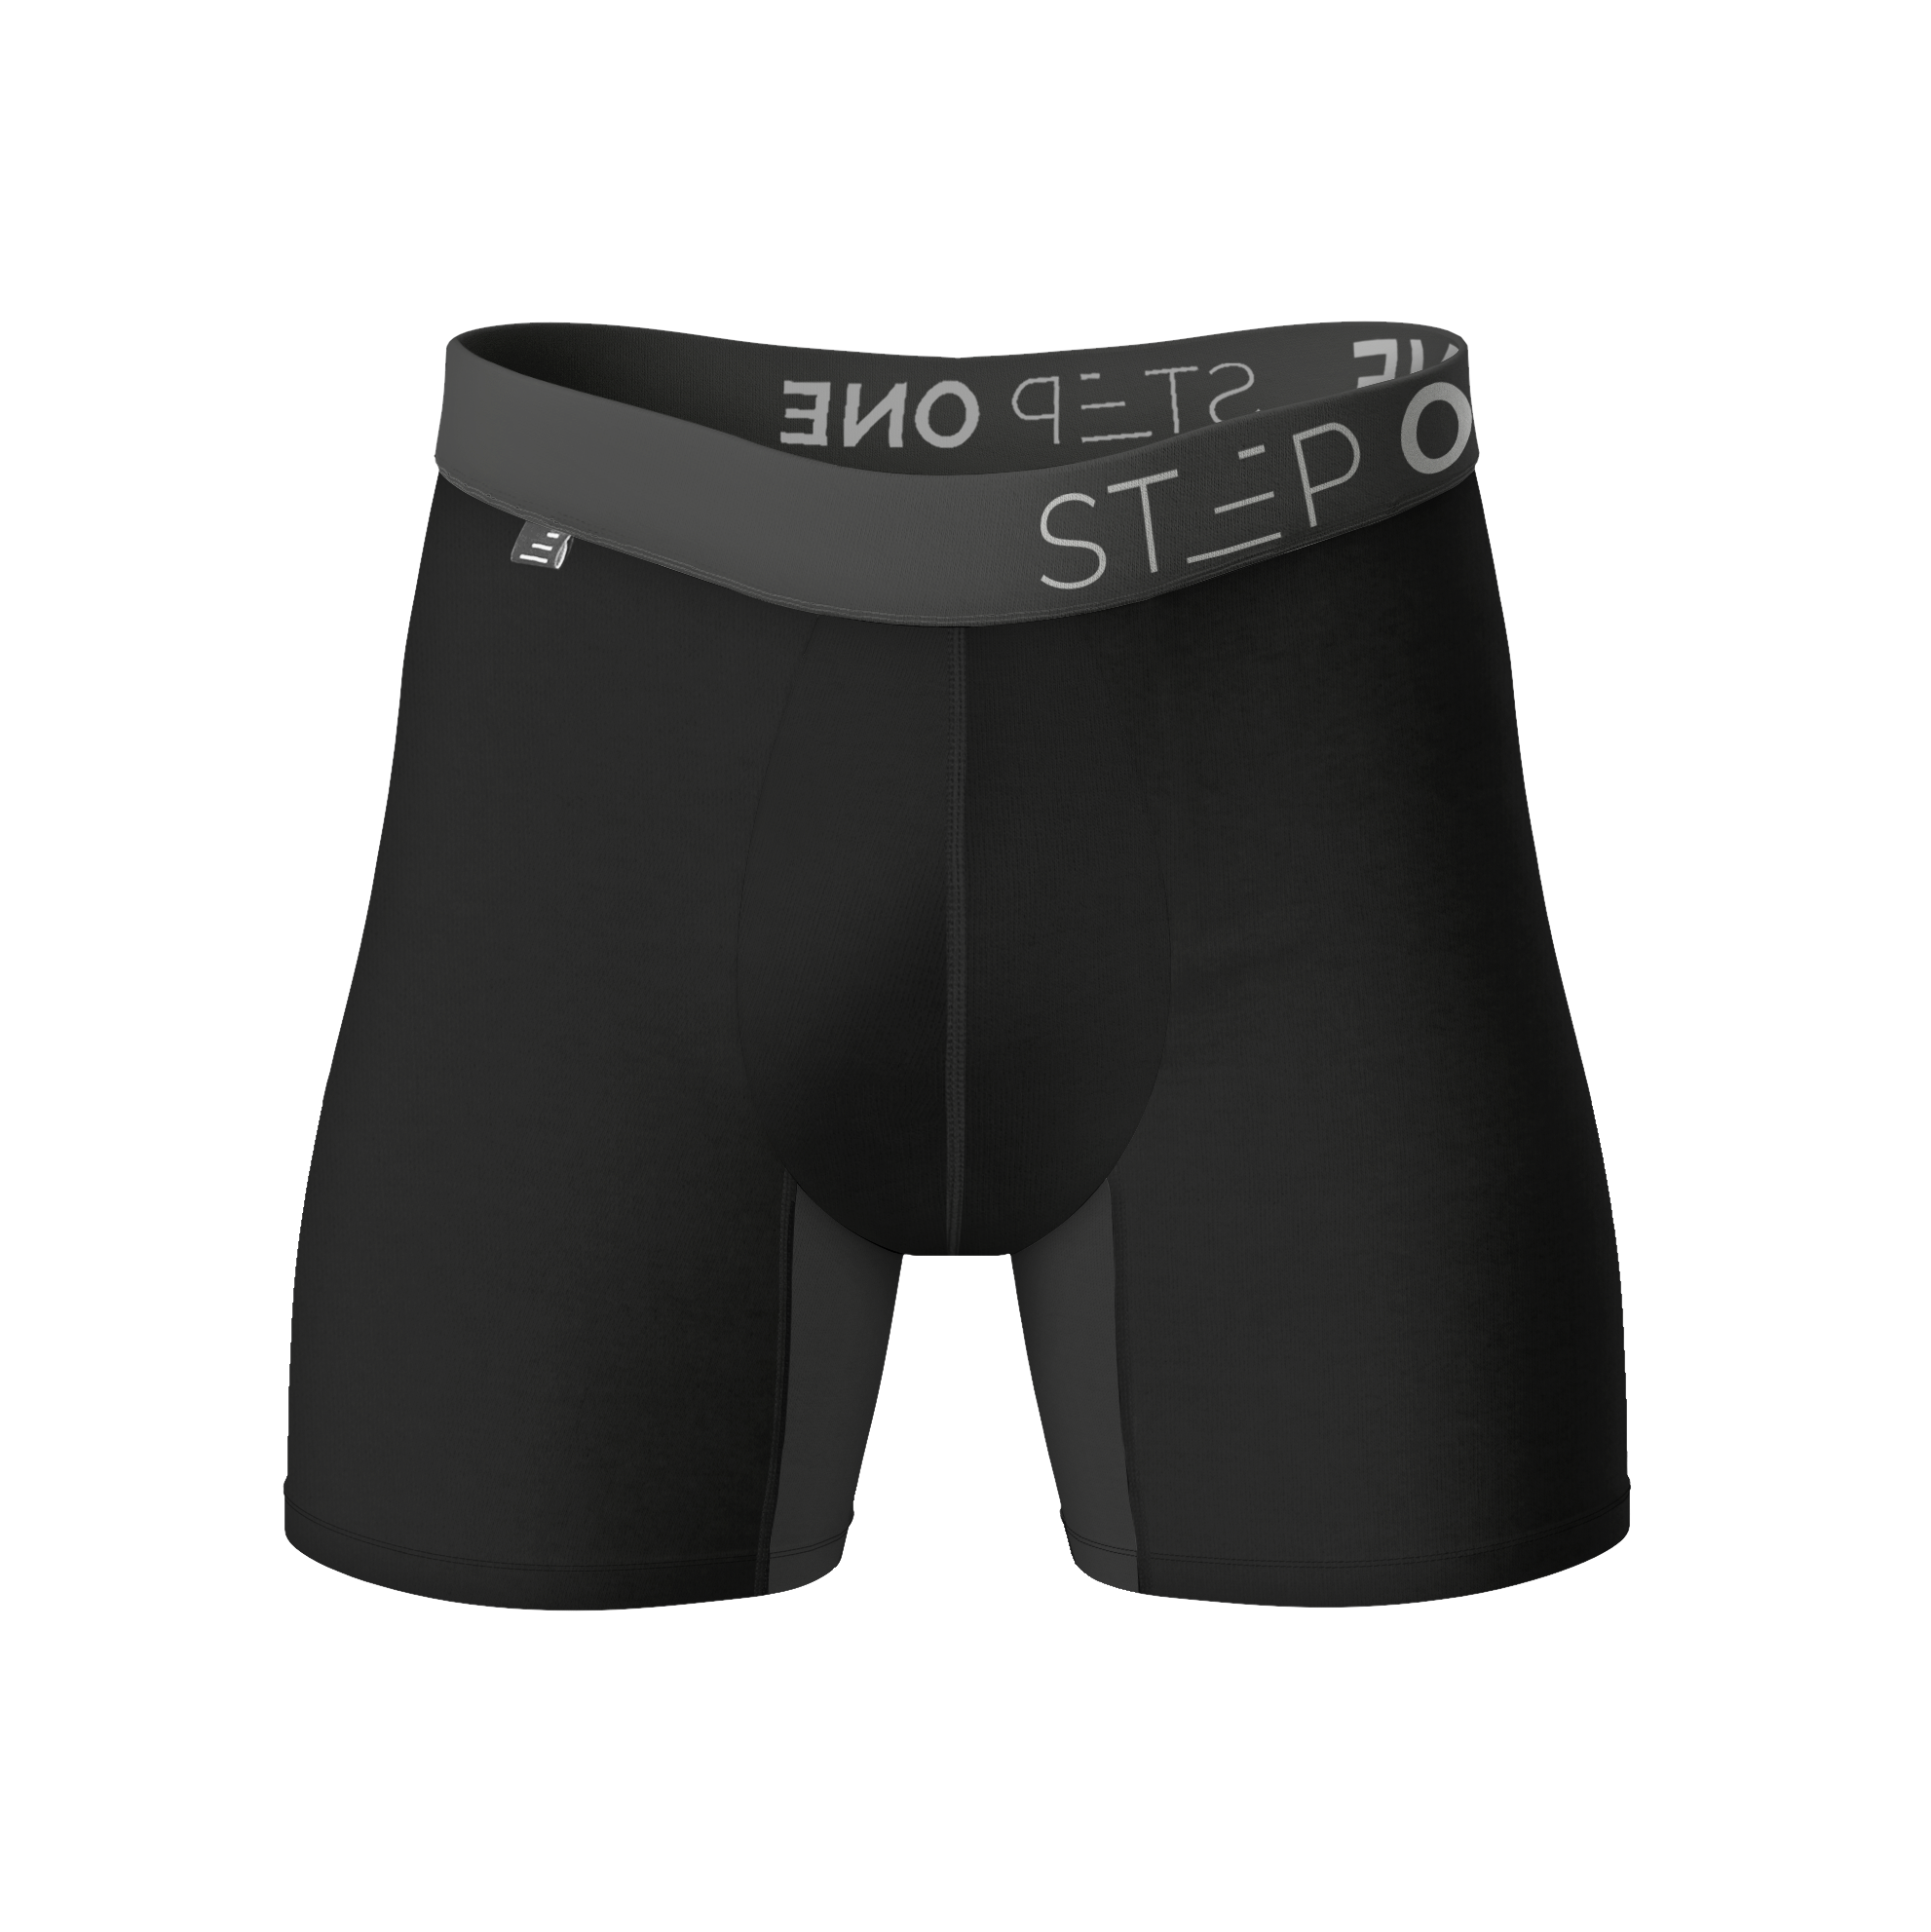 Step One Men's Bamboo Underwear Sports - Black Currants - Black Currants M  - 6 requests